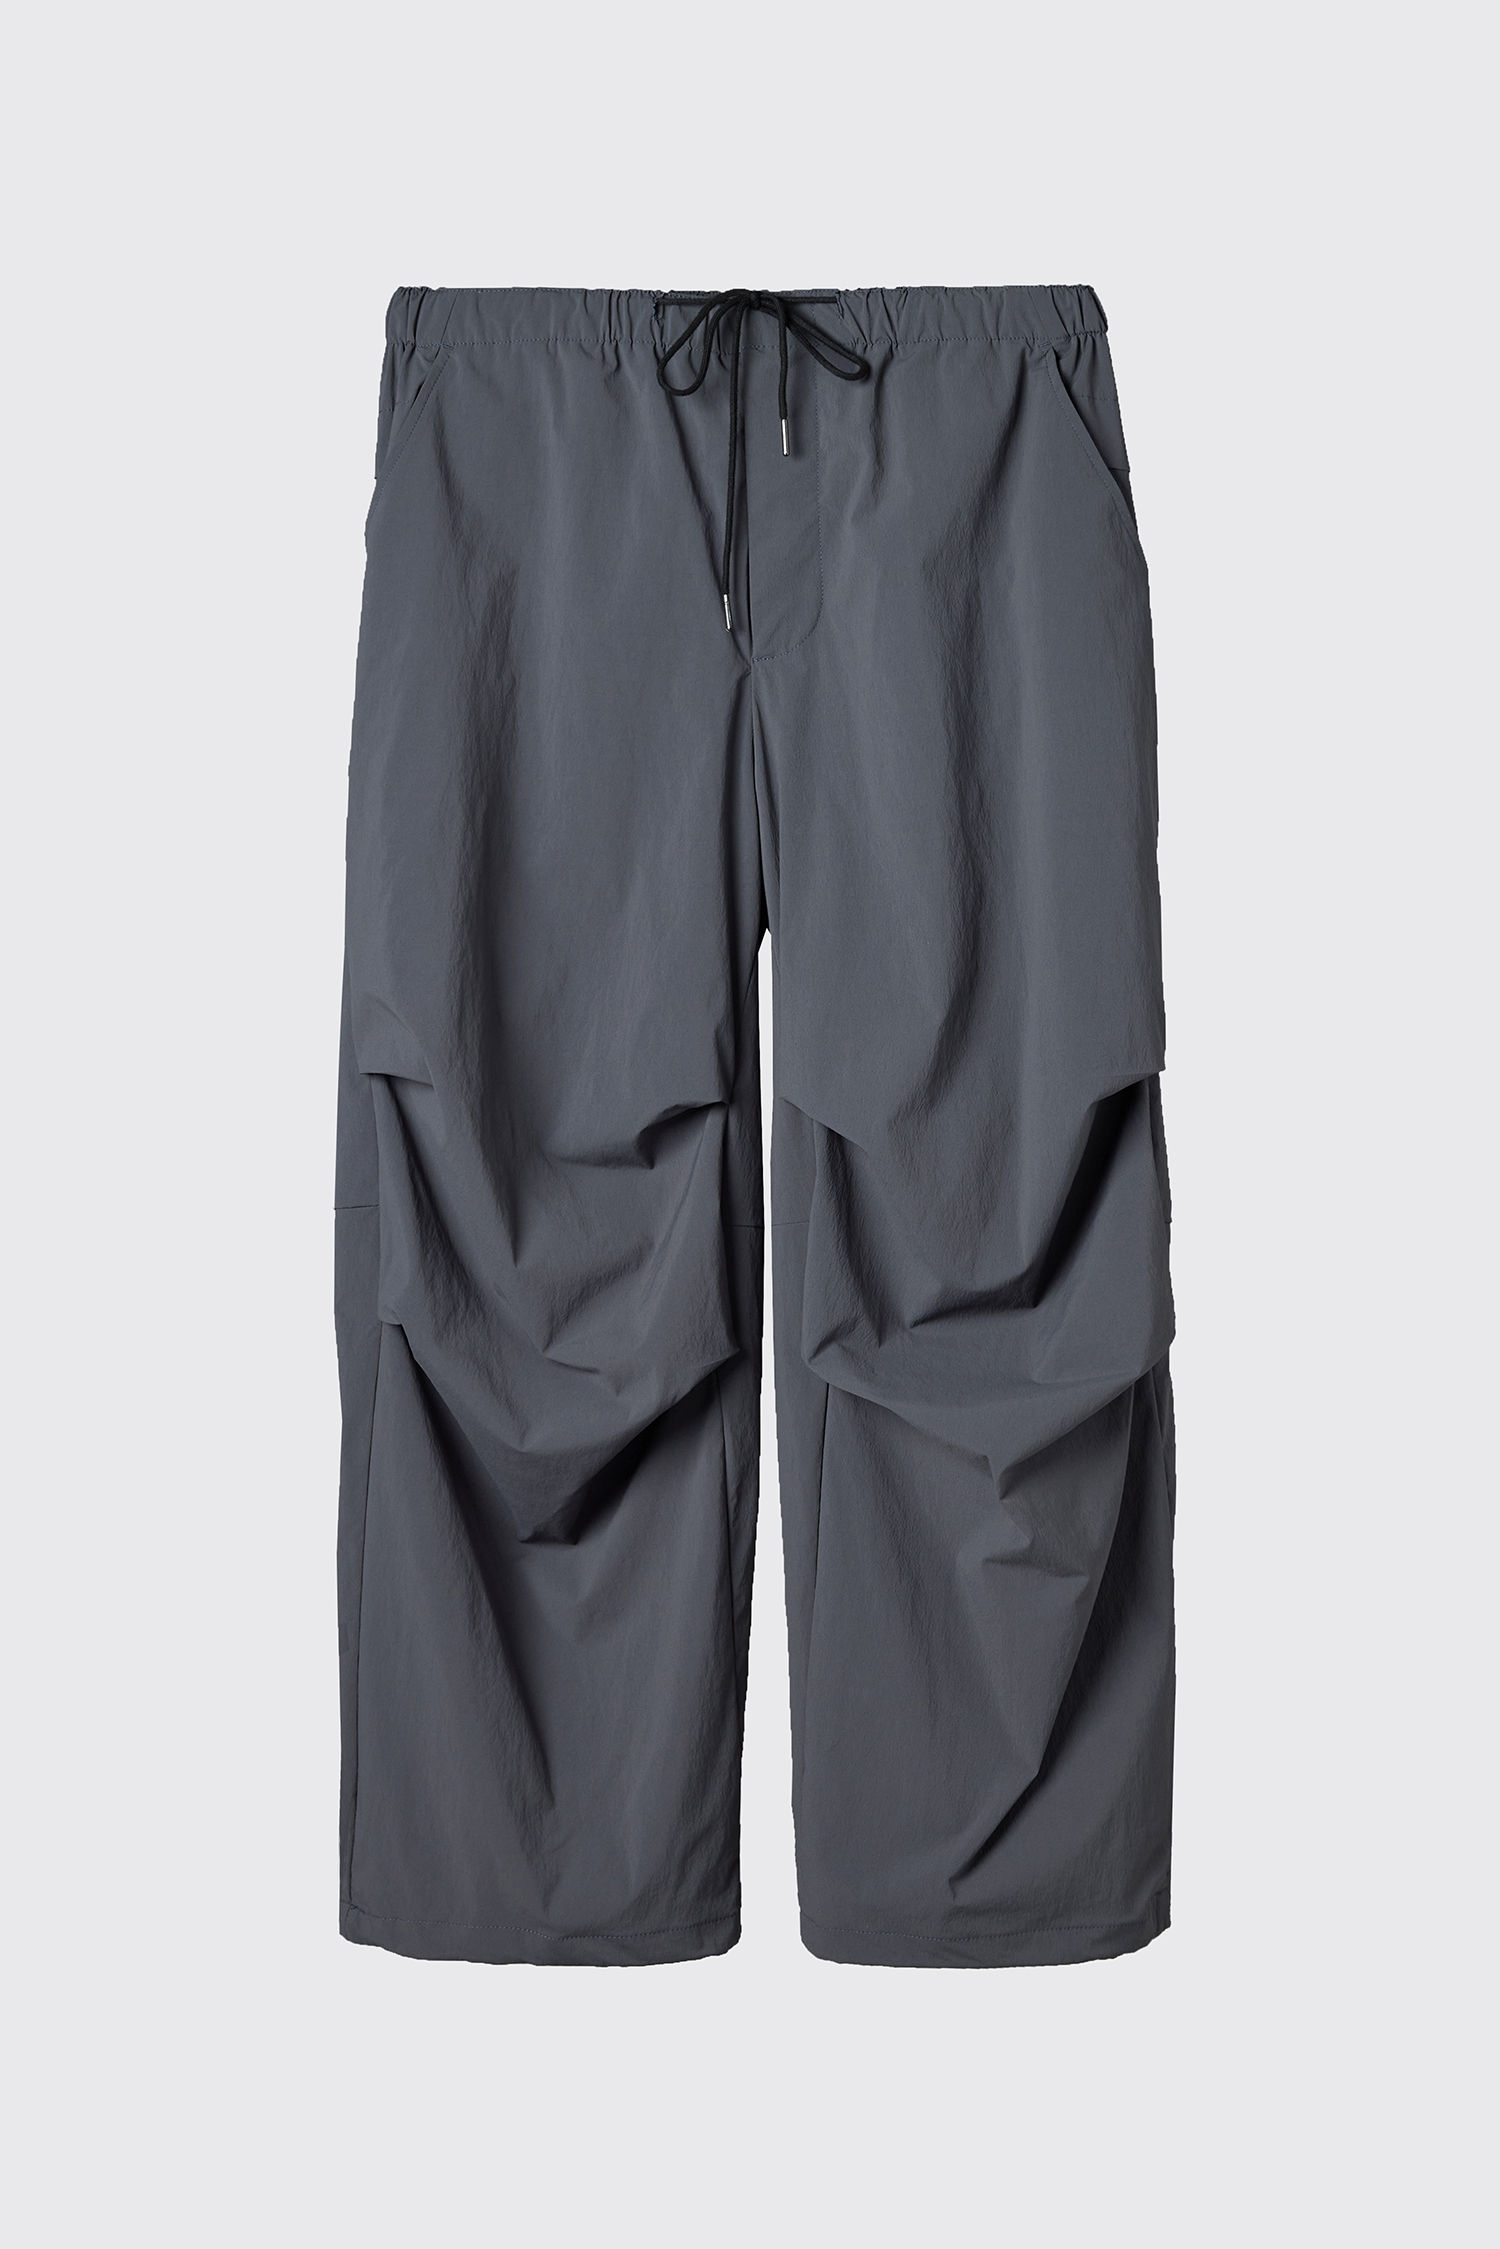 Snow Over Pants V2(Lining) Charcoal